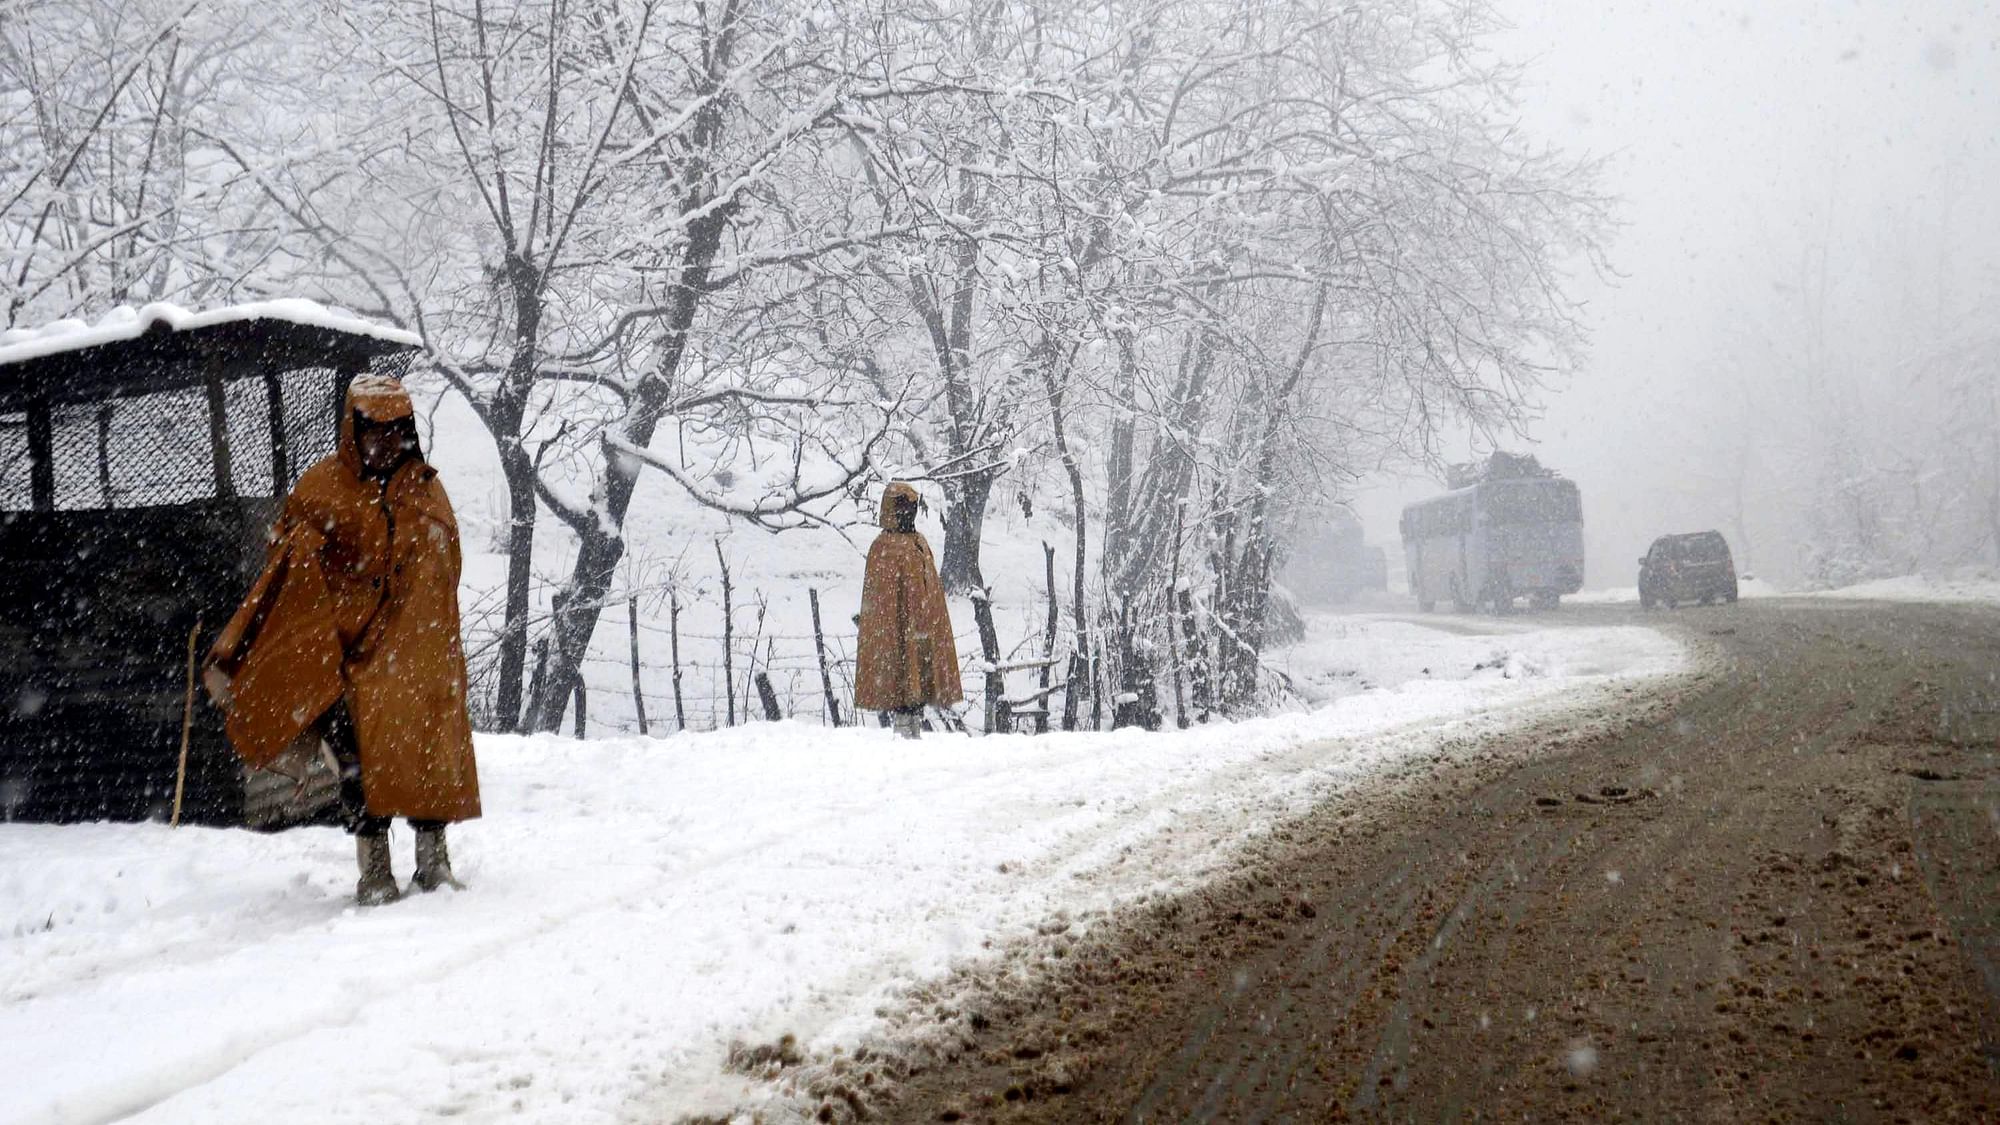 Srinagar city — the summer capital of Jammu and Kashmir — recorded a low of 1.6 degrees Celsius on Monday night, 10 December, officials said on Tuesday, 11 December.